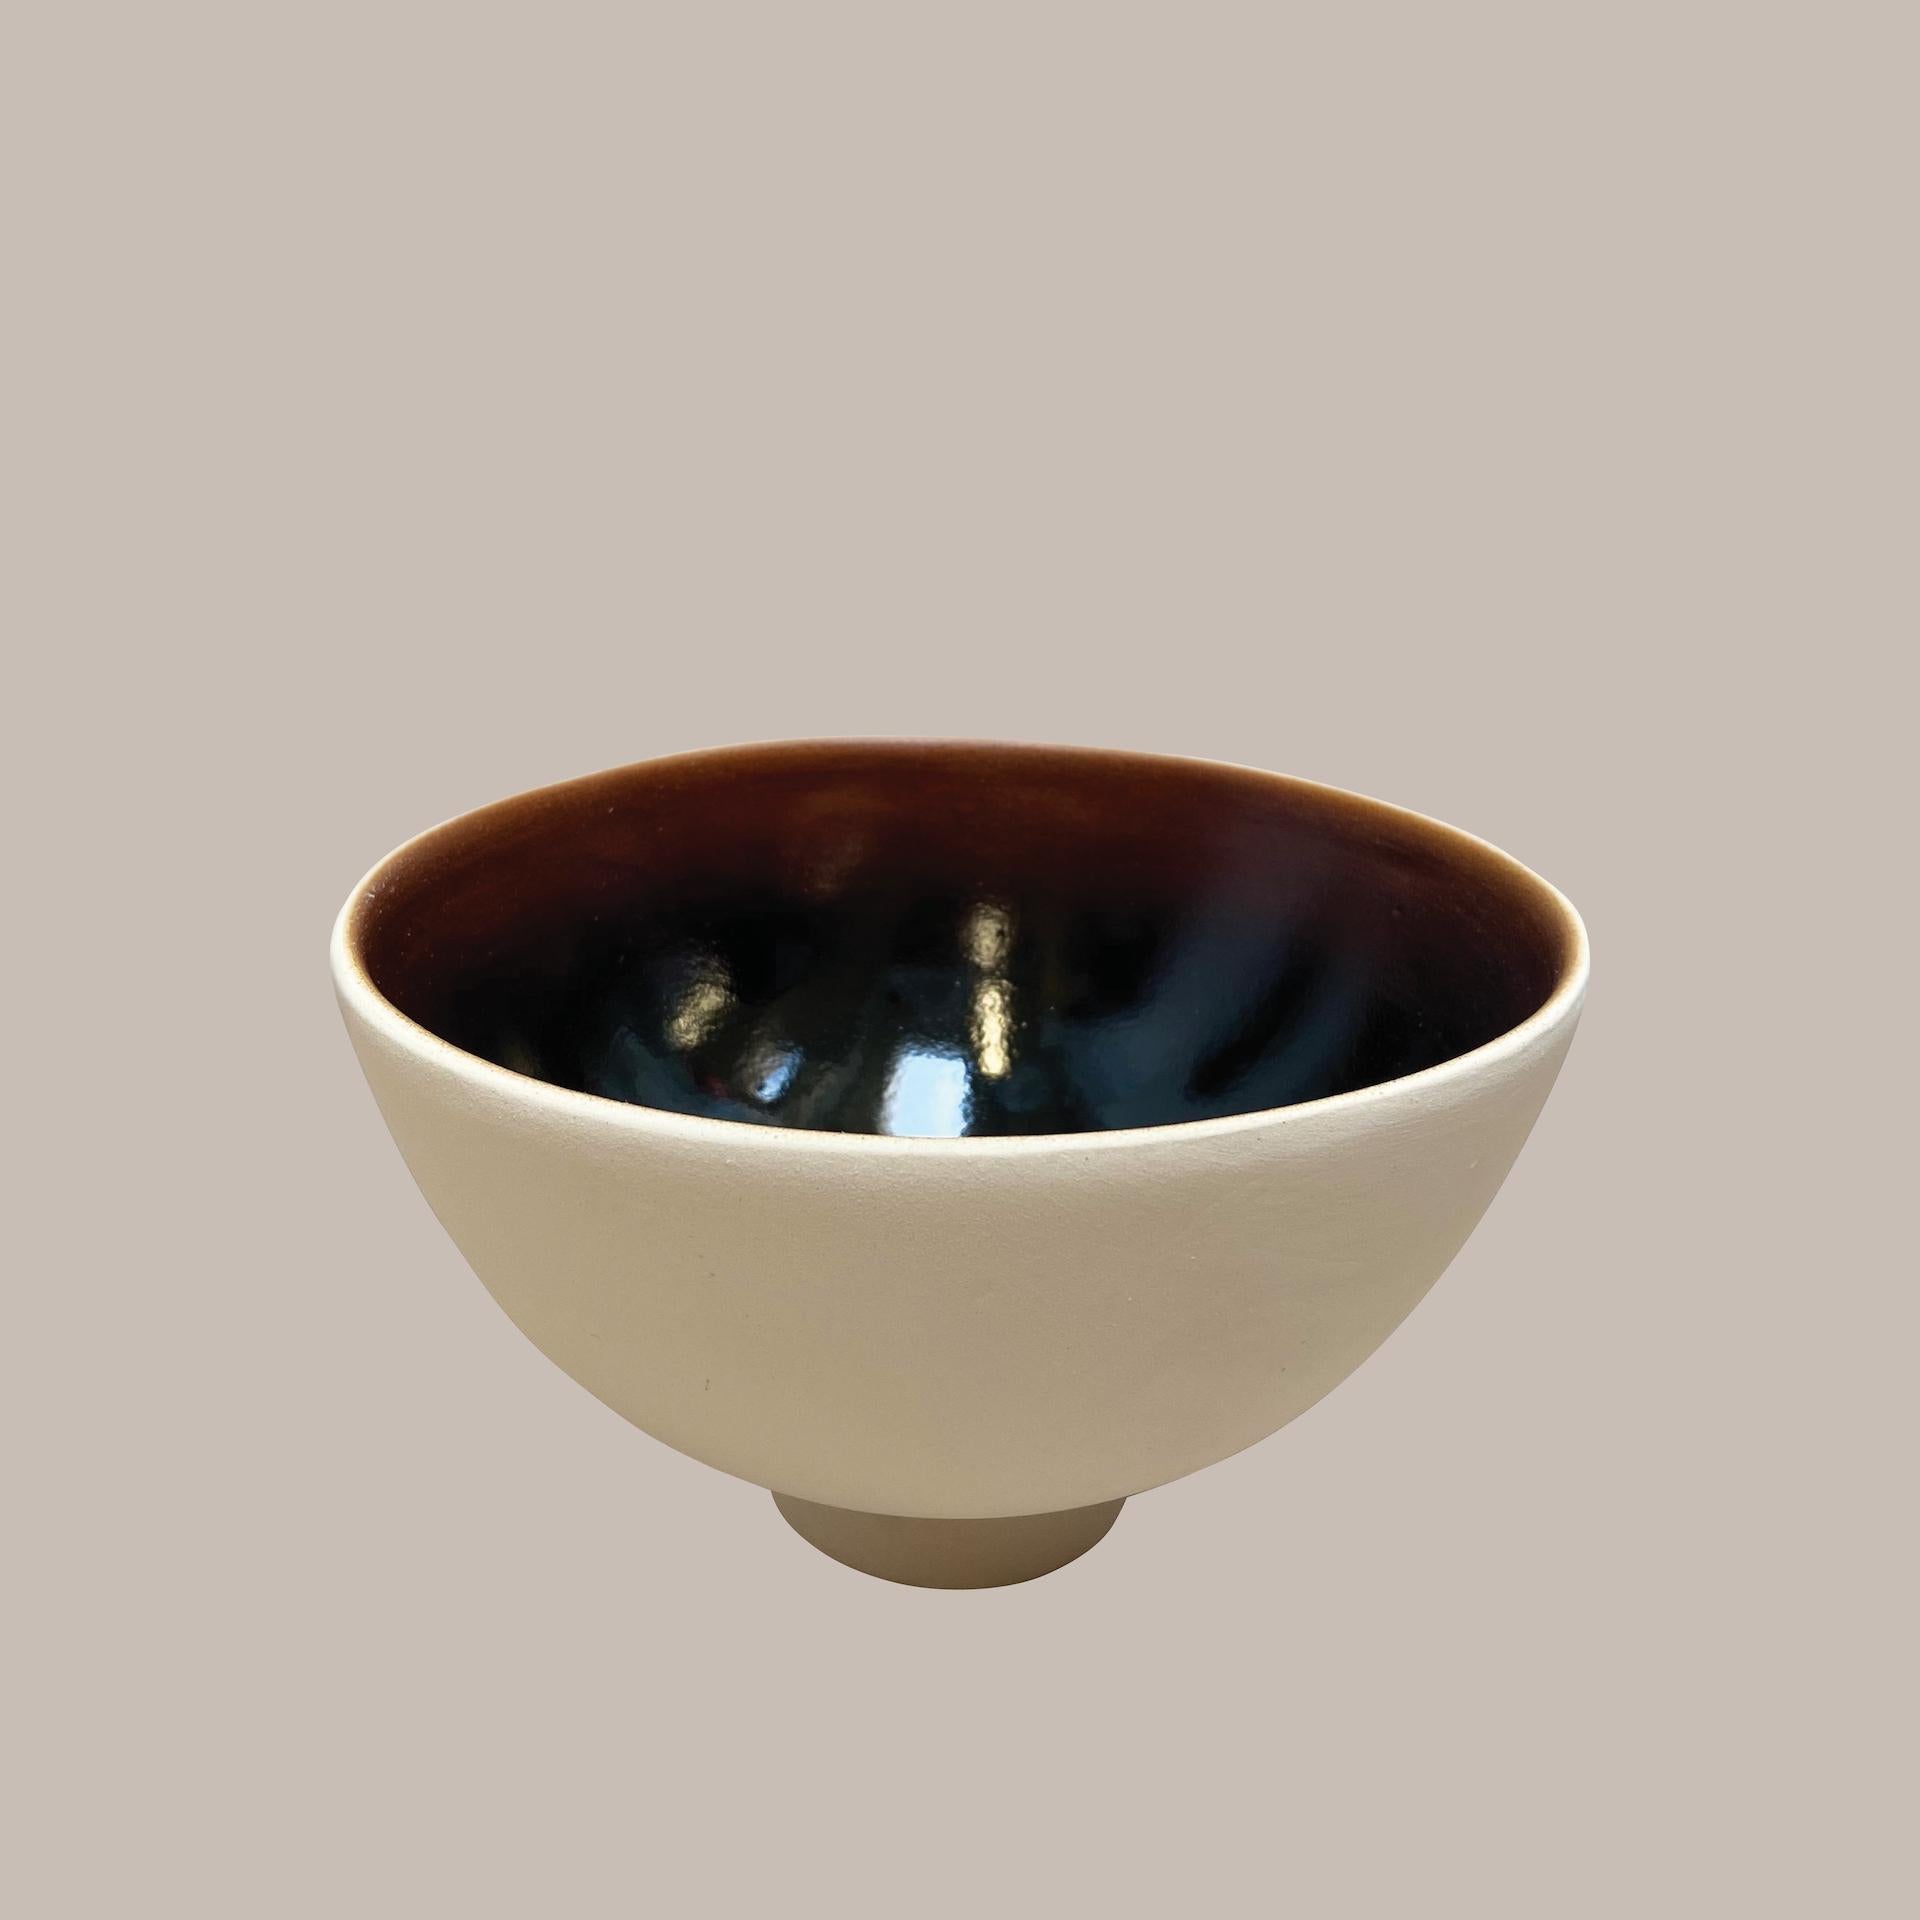 Ott another paradigmatic handmade ceramic bowl by Studio Yoon Seok-hyeon,
2019
Dimensions: W 20 x H 9 cm
Materials: Ott (Natural resin from Ott tree), porcelain
700g

It is available to customize various colors in Ott's natural color